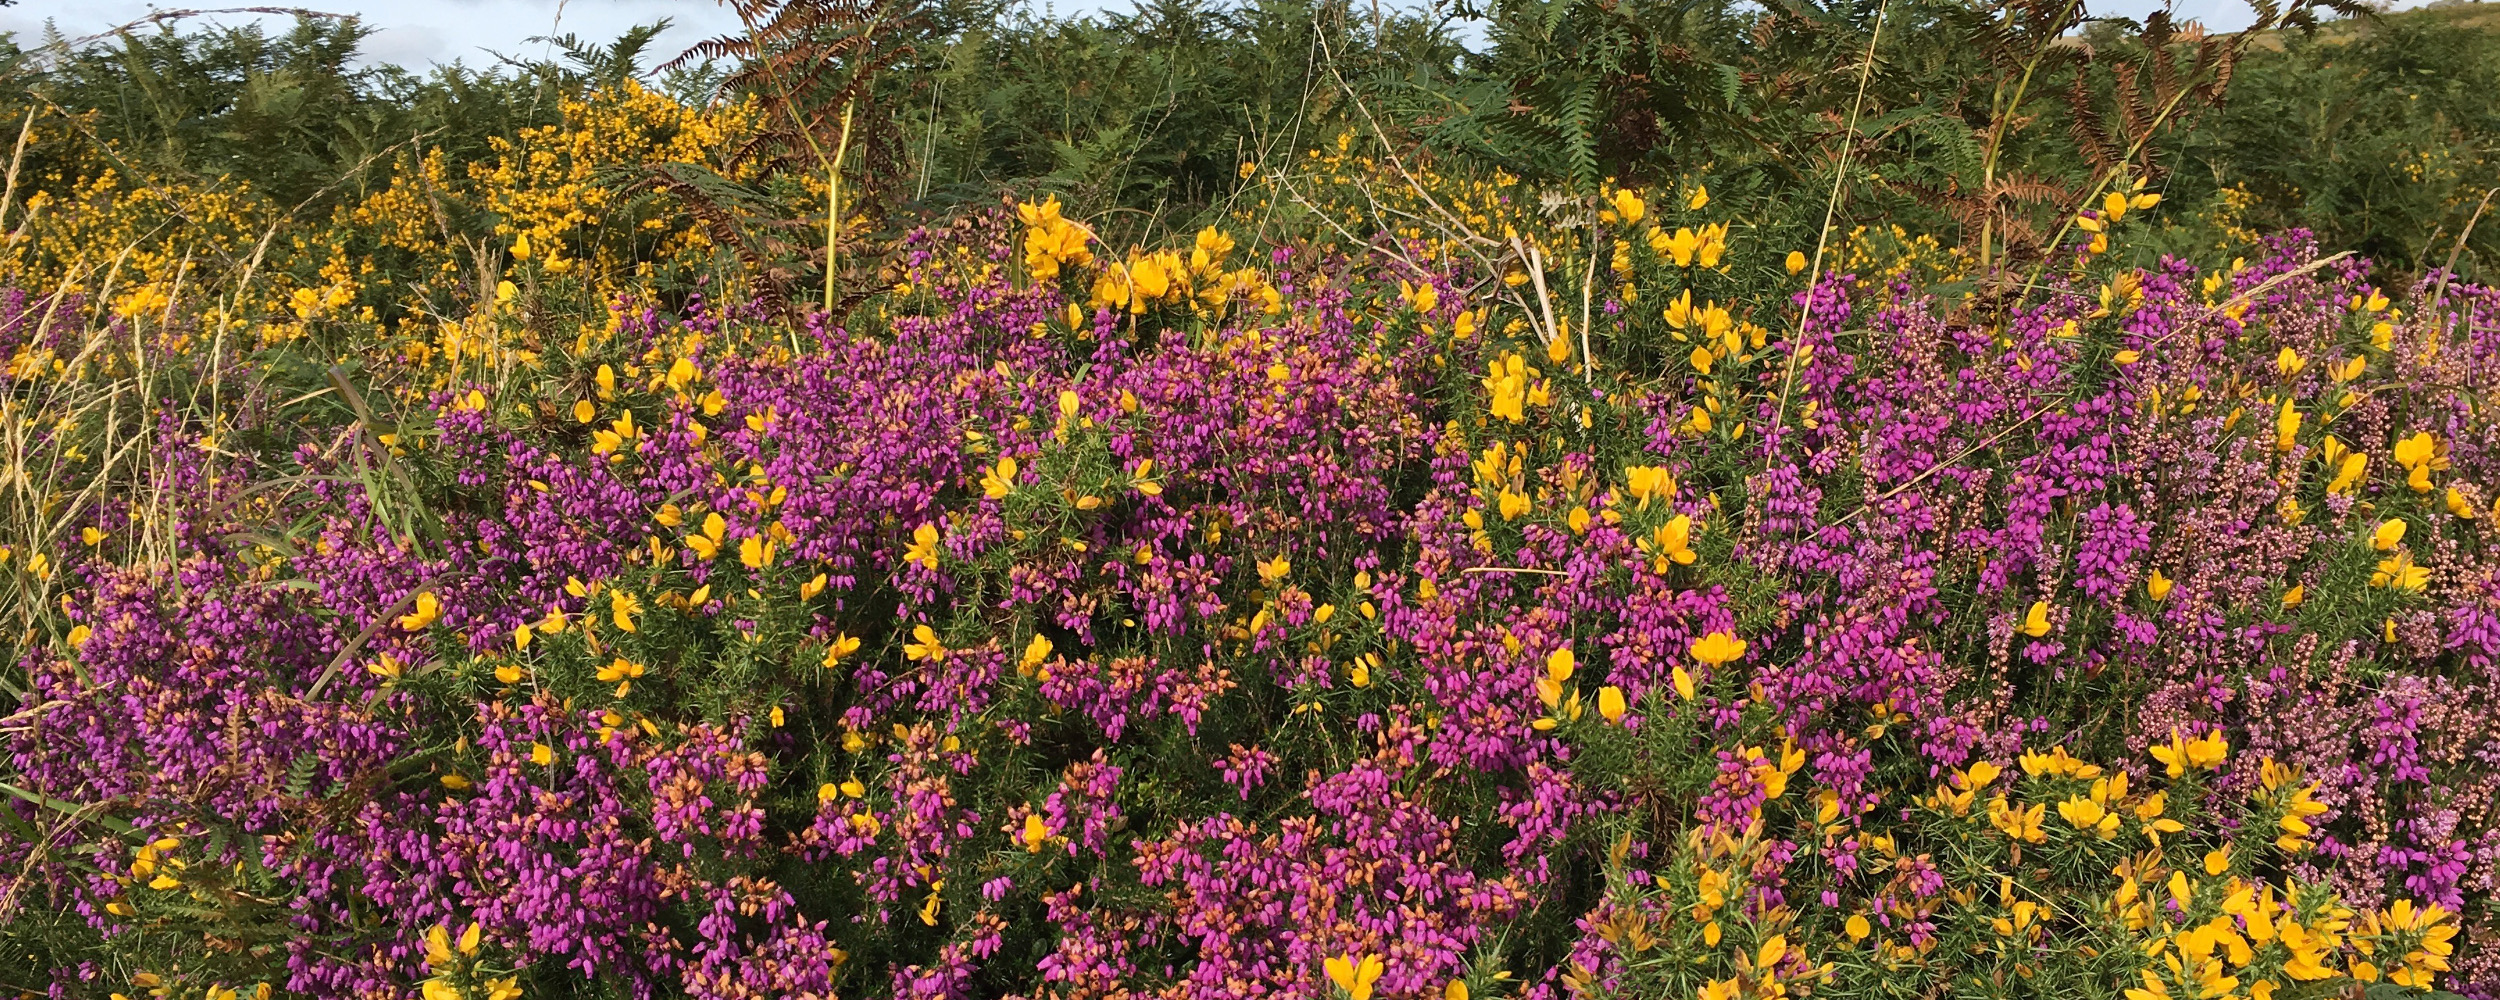 Heather and Gorse in bloom